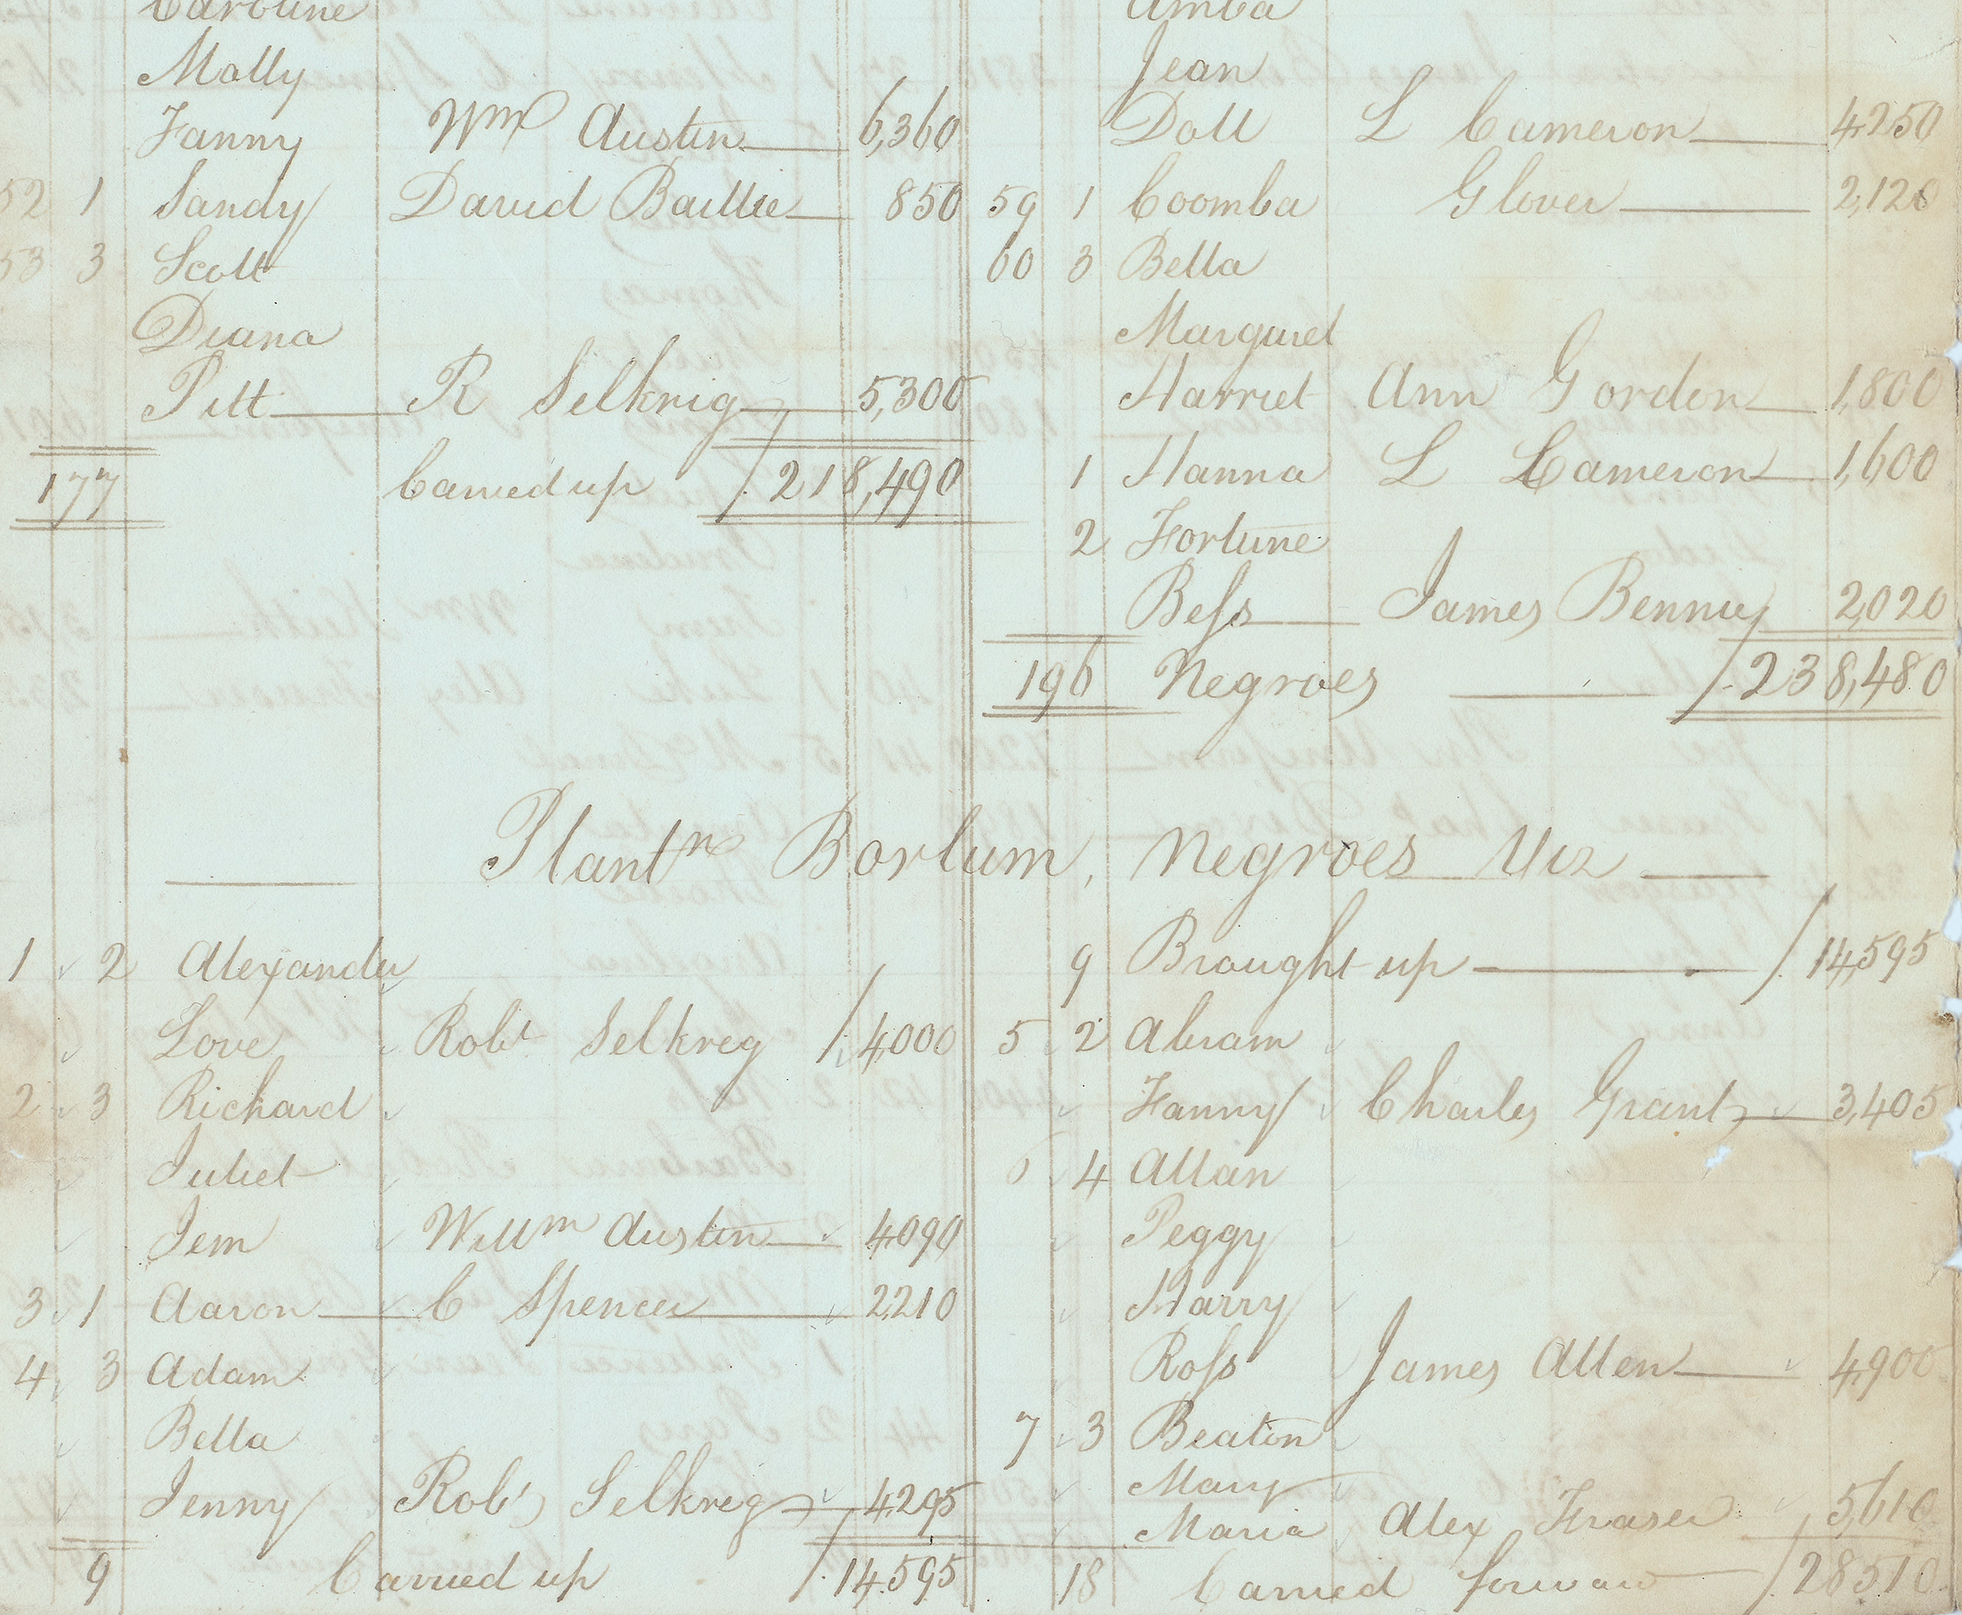 A document showing the hand-written list of enslaved persons from the record of sale by auction